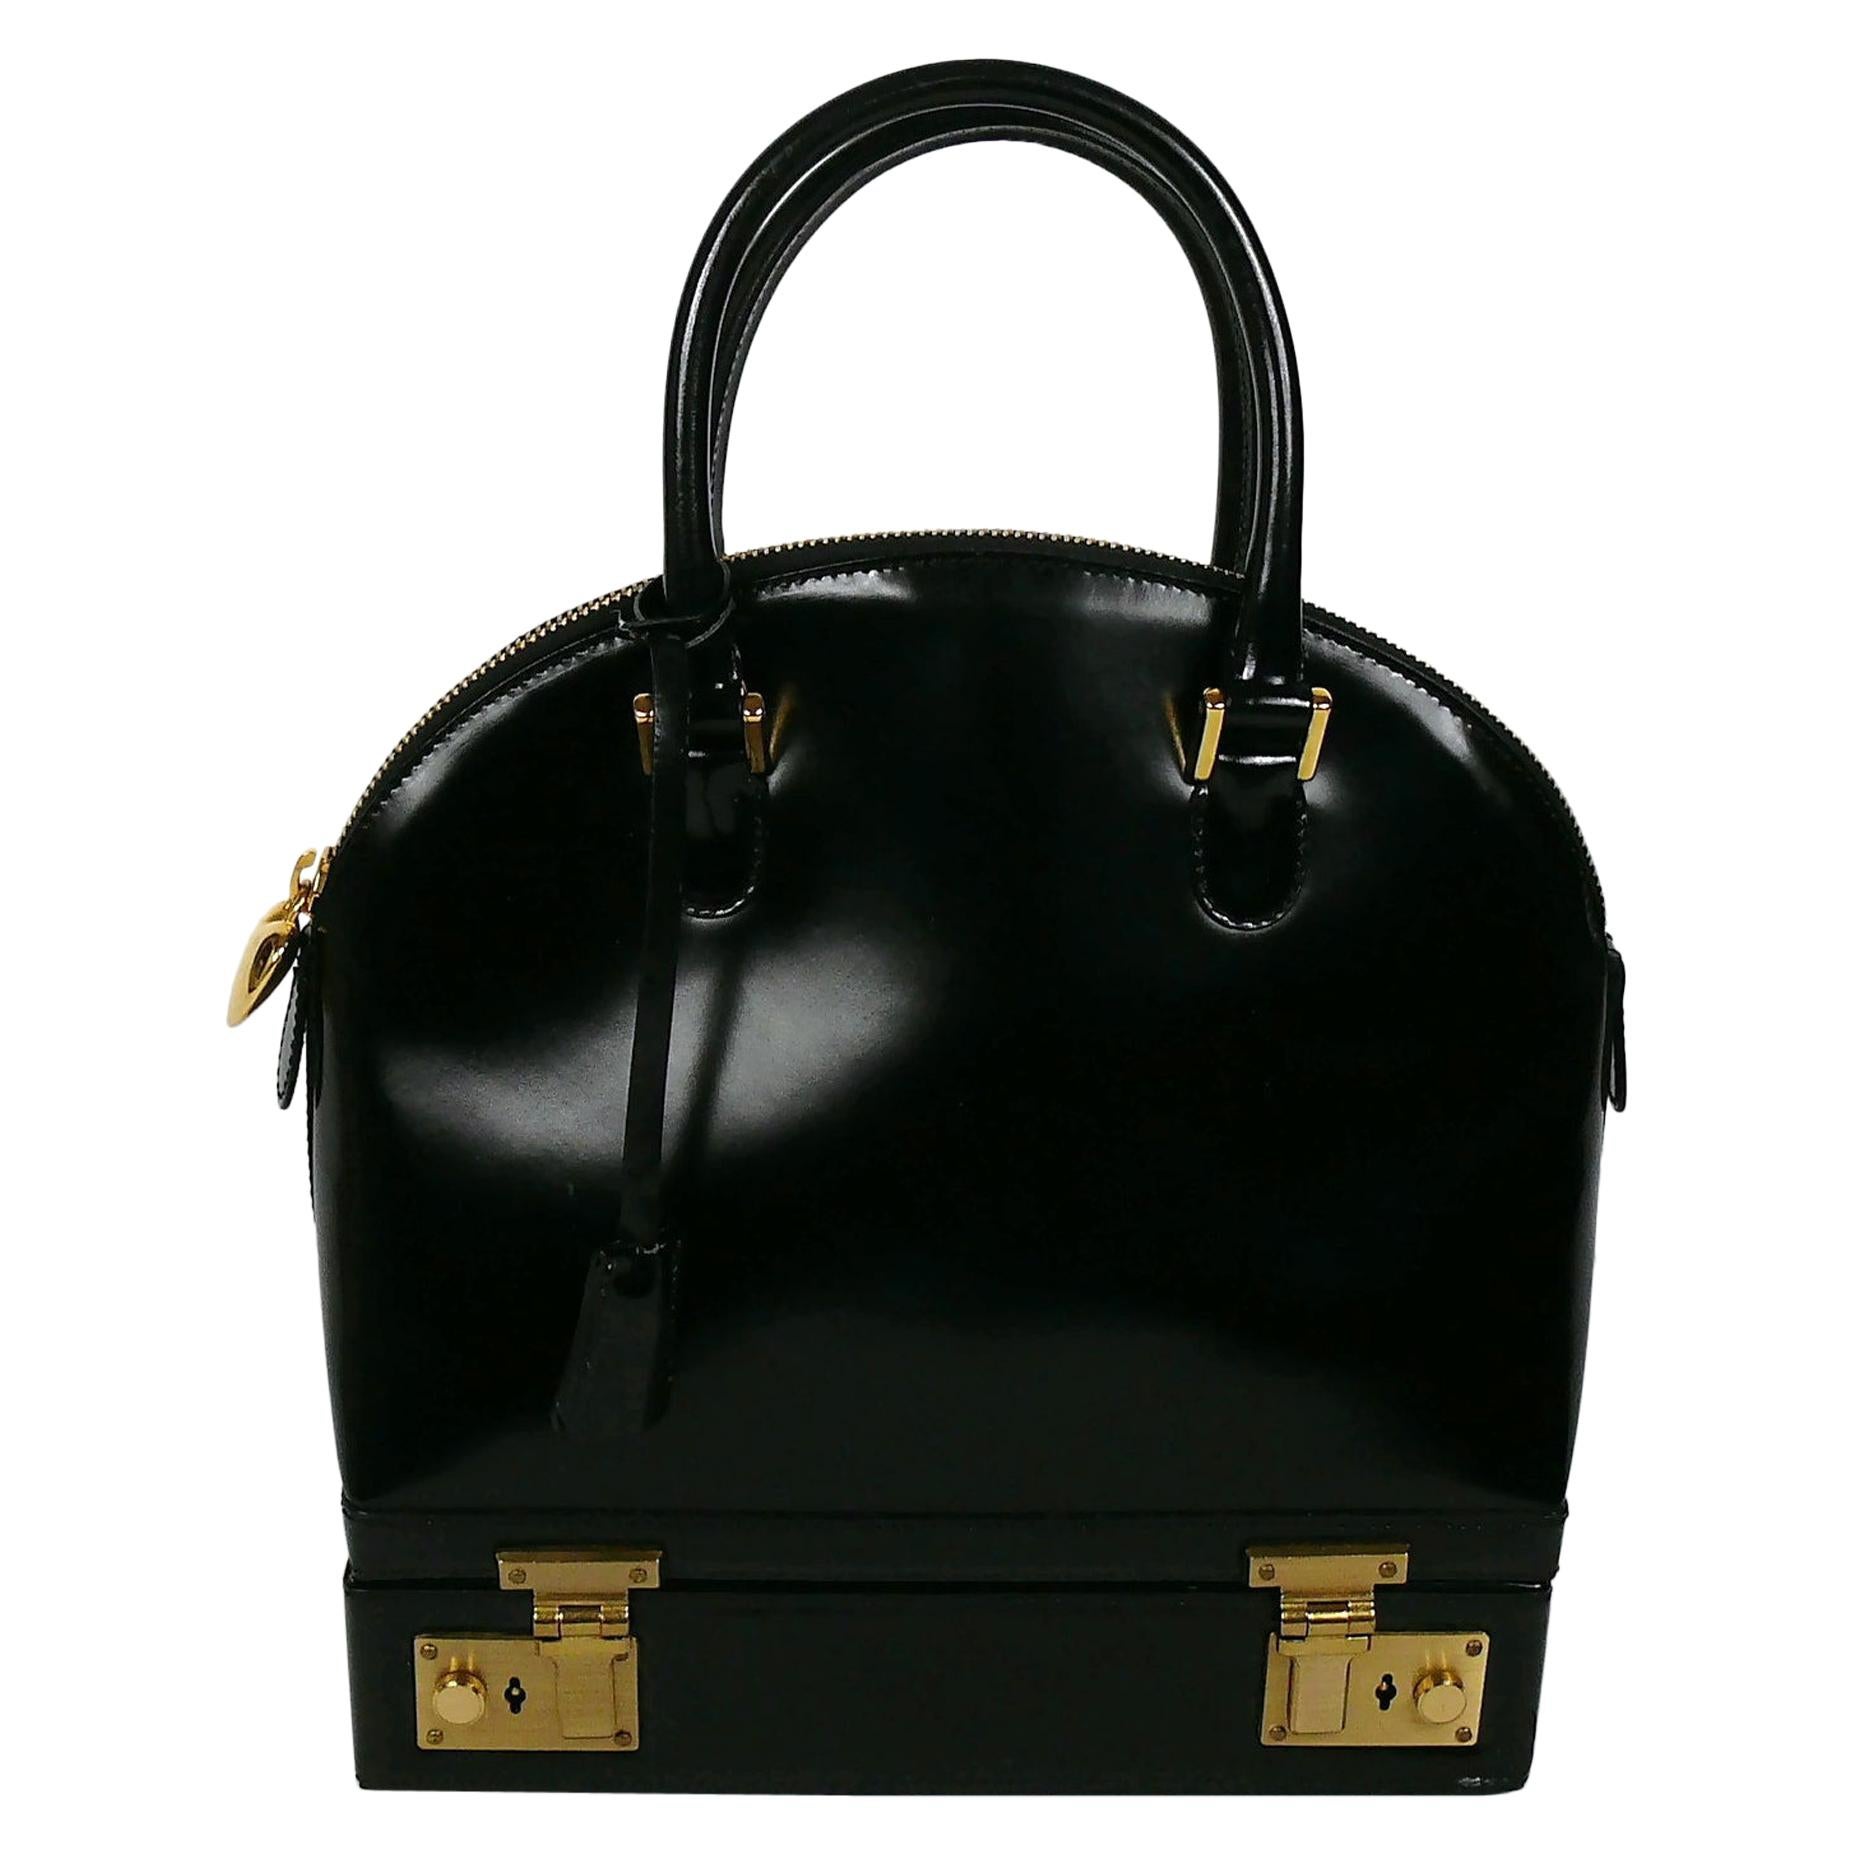 Moschino Vintage Black Patent Leather Sac Mallette Top Handle Bag